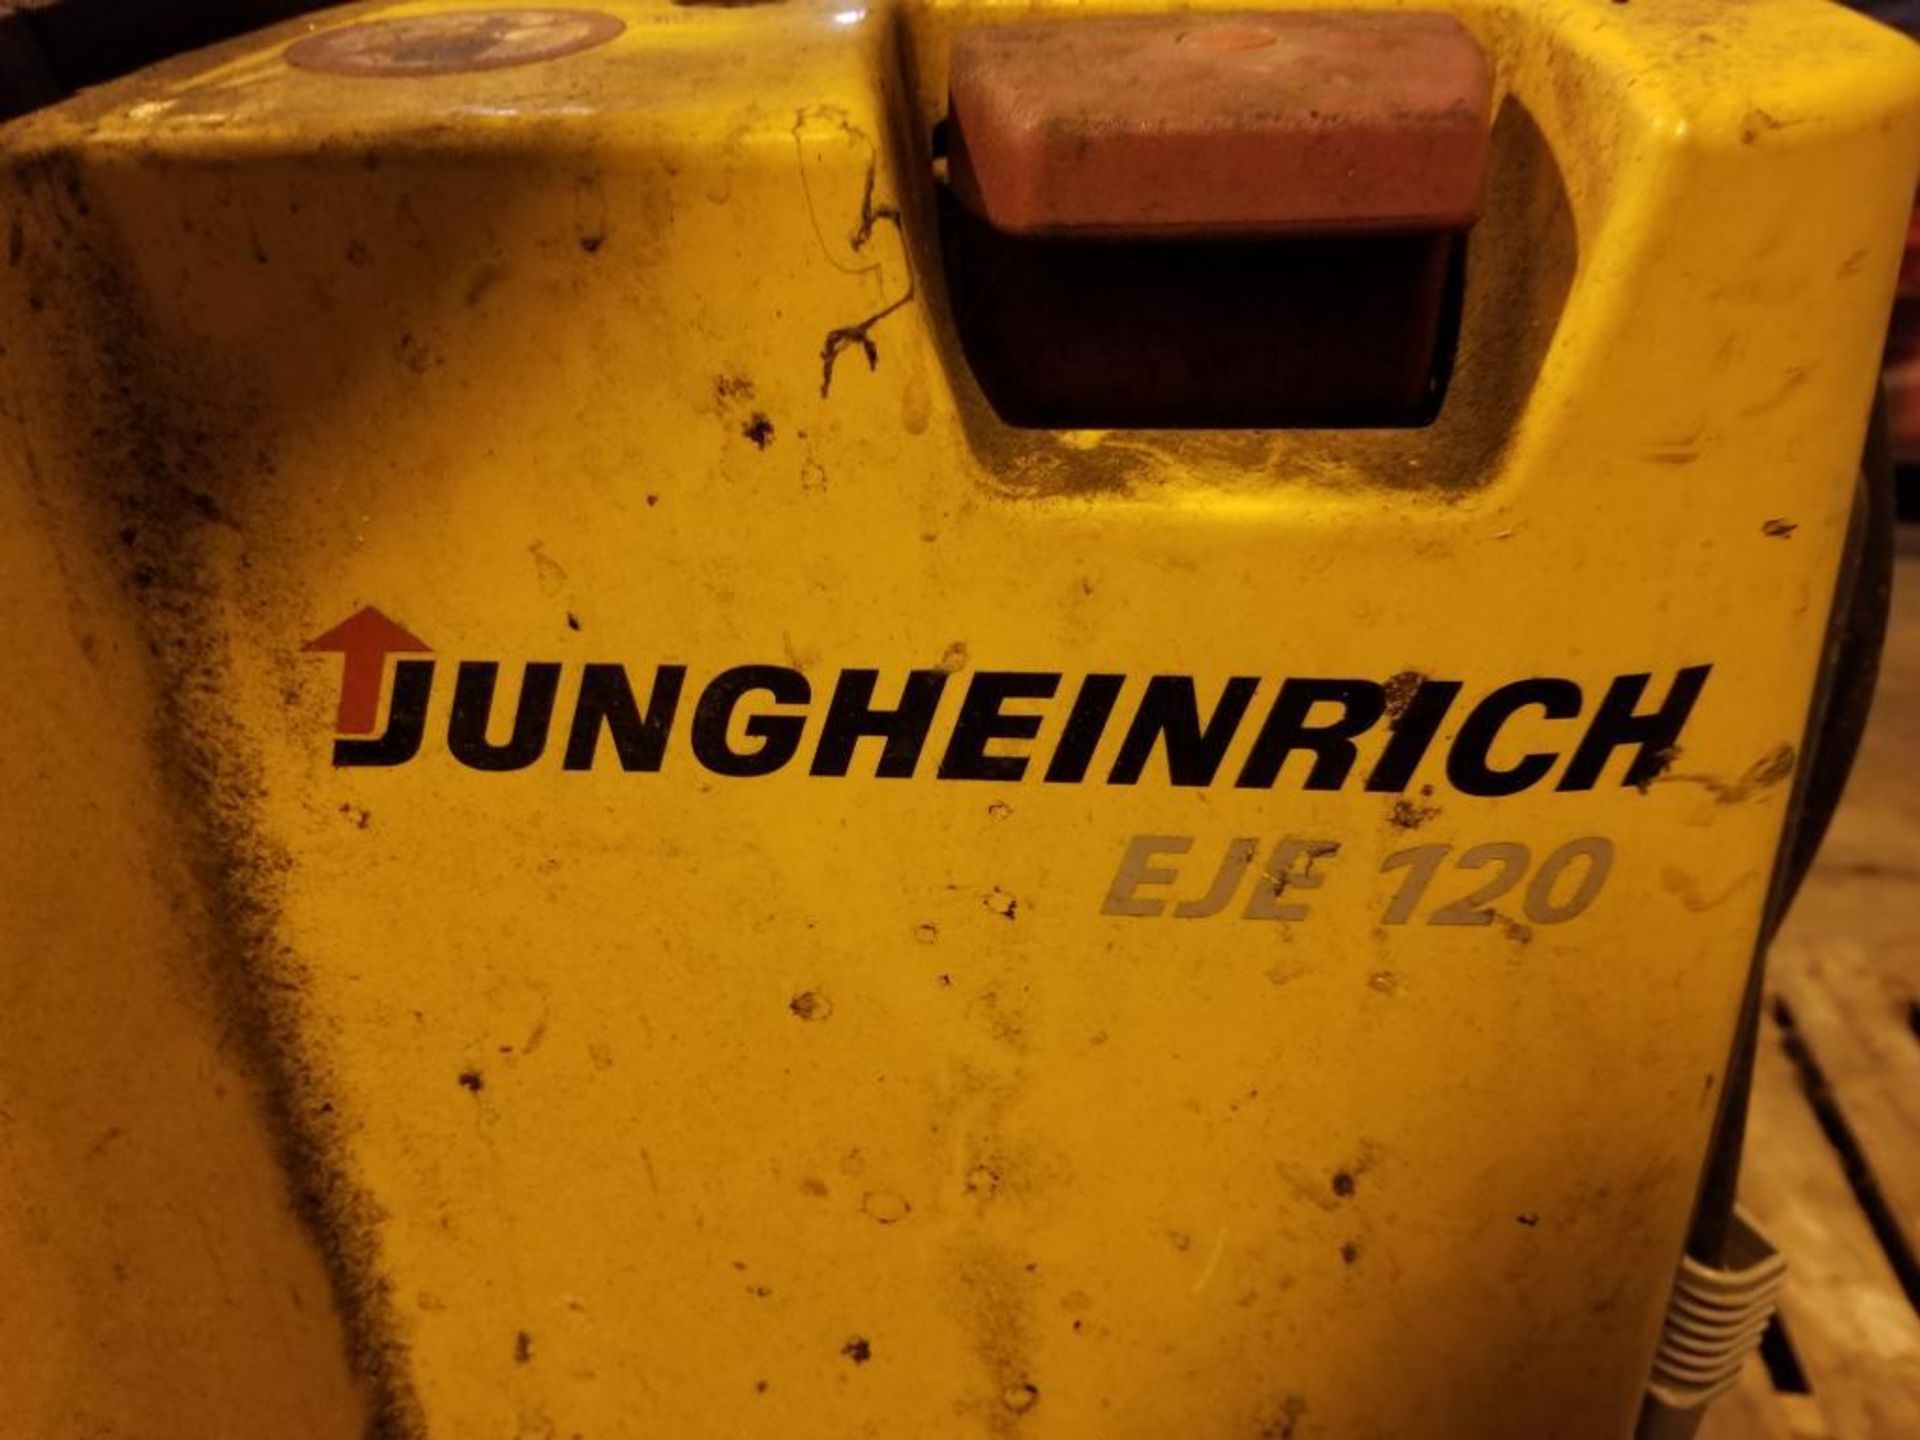 Dungheinrich walk behind pallet lift truck, model EJE 120, condition unknown - Image 5 of 12